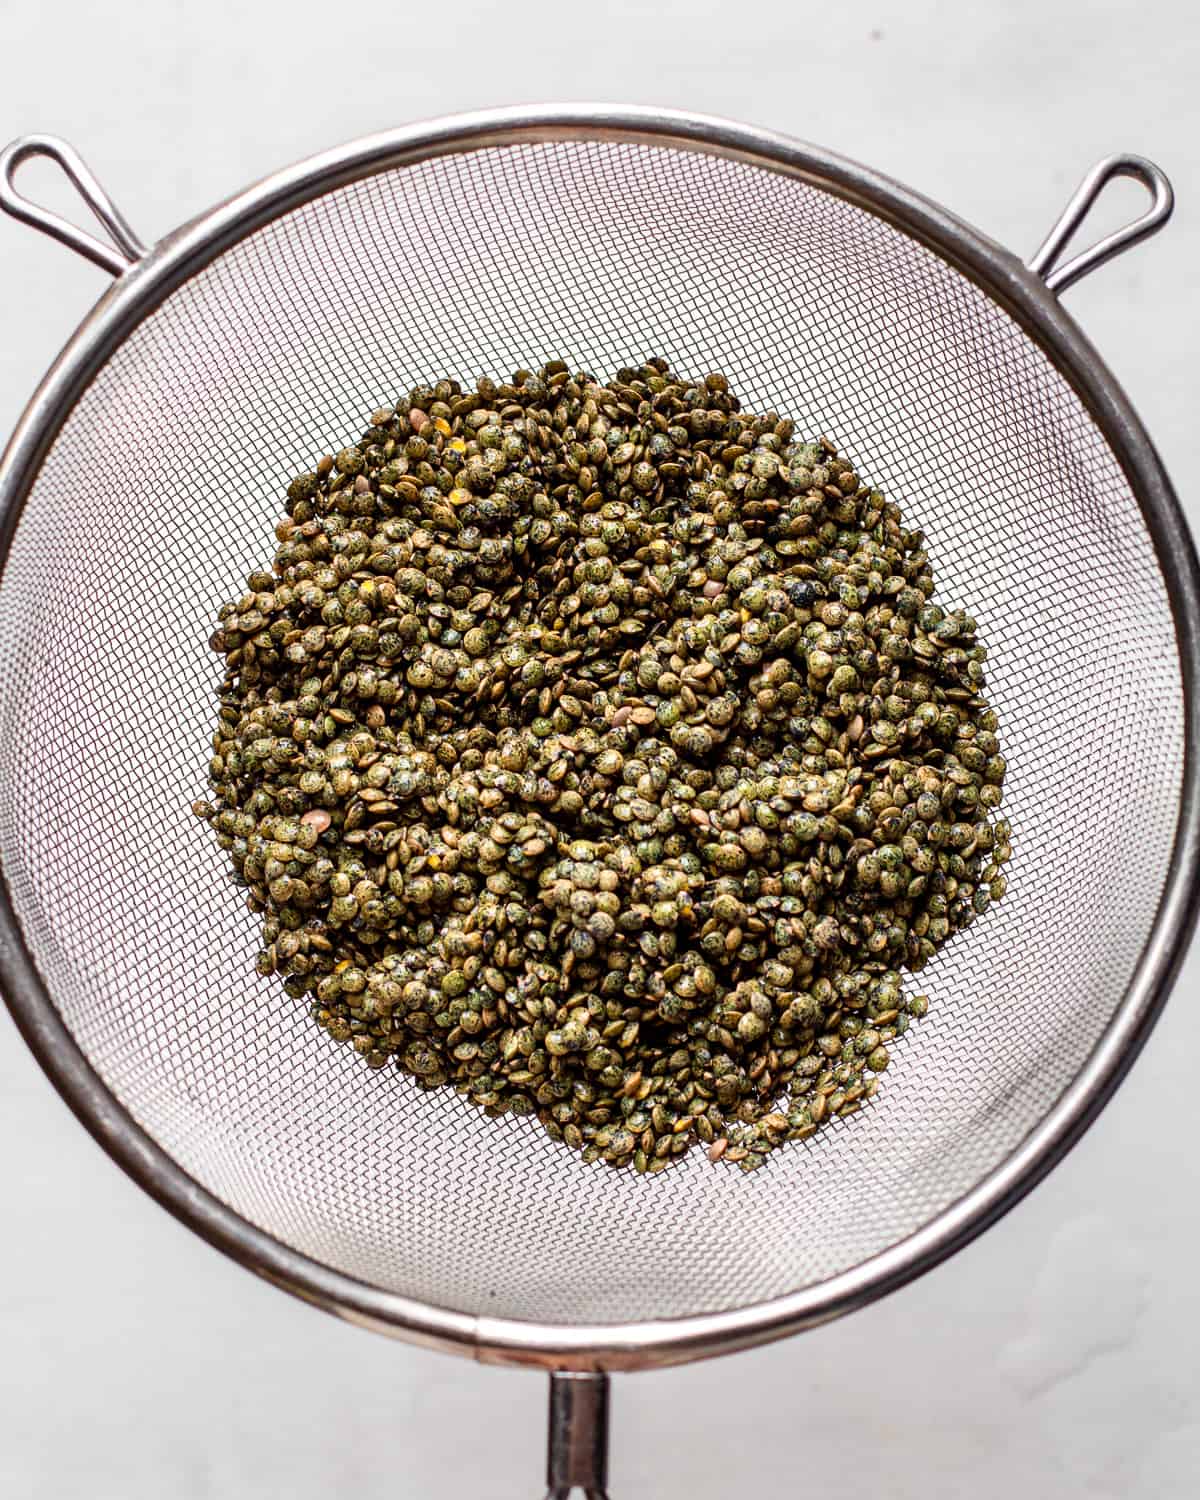 Rinsed puy lentils in a fine-mesh sieve.